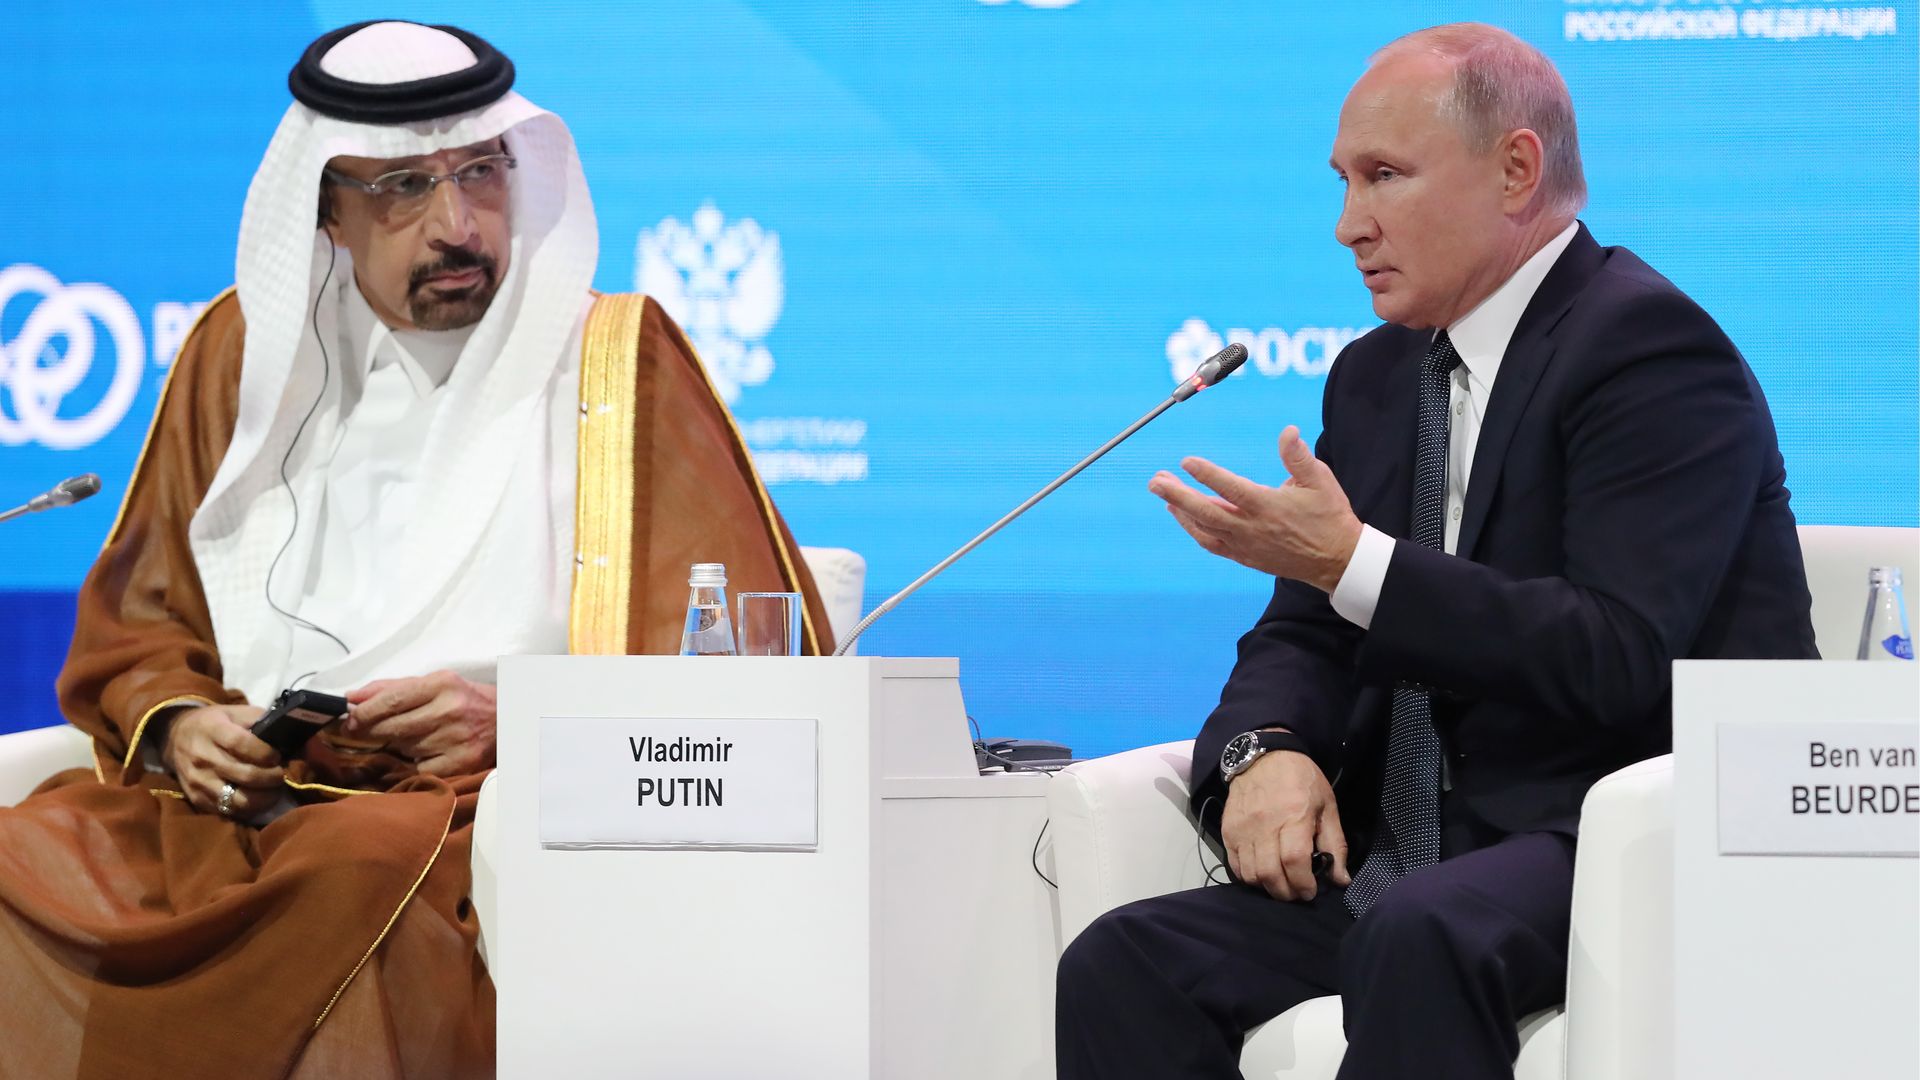 Khalid A. Al-Falih and Vladimir Putin seated onstage at a conference